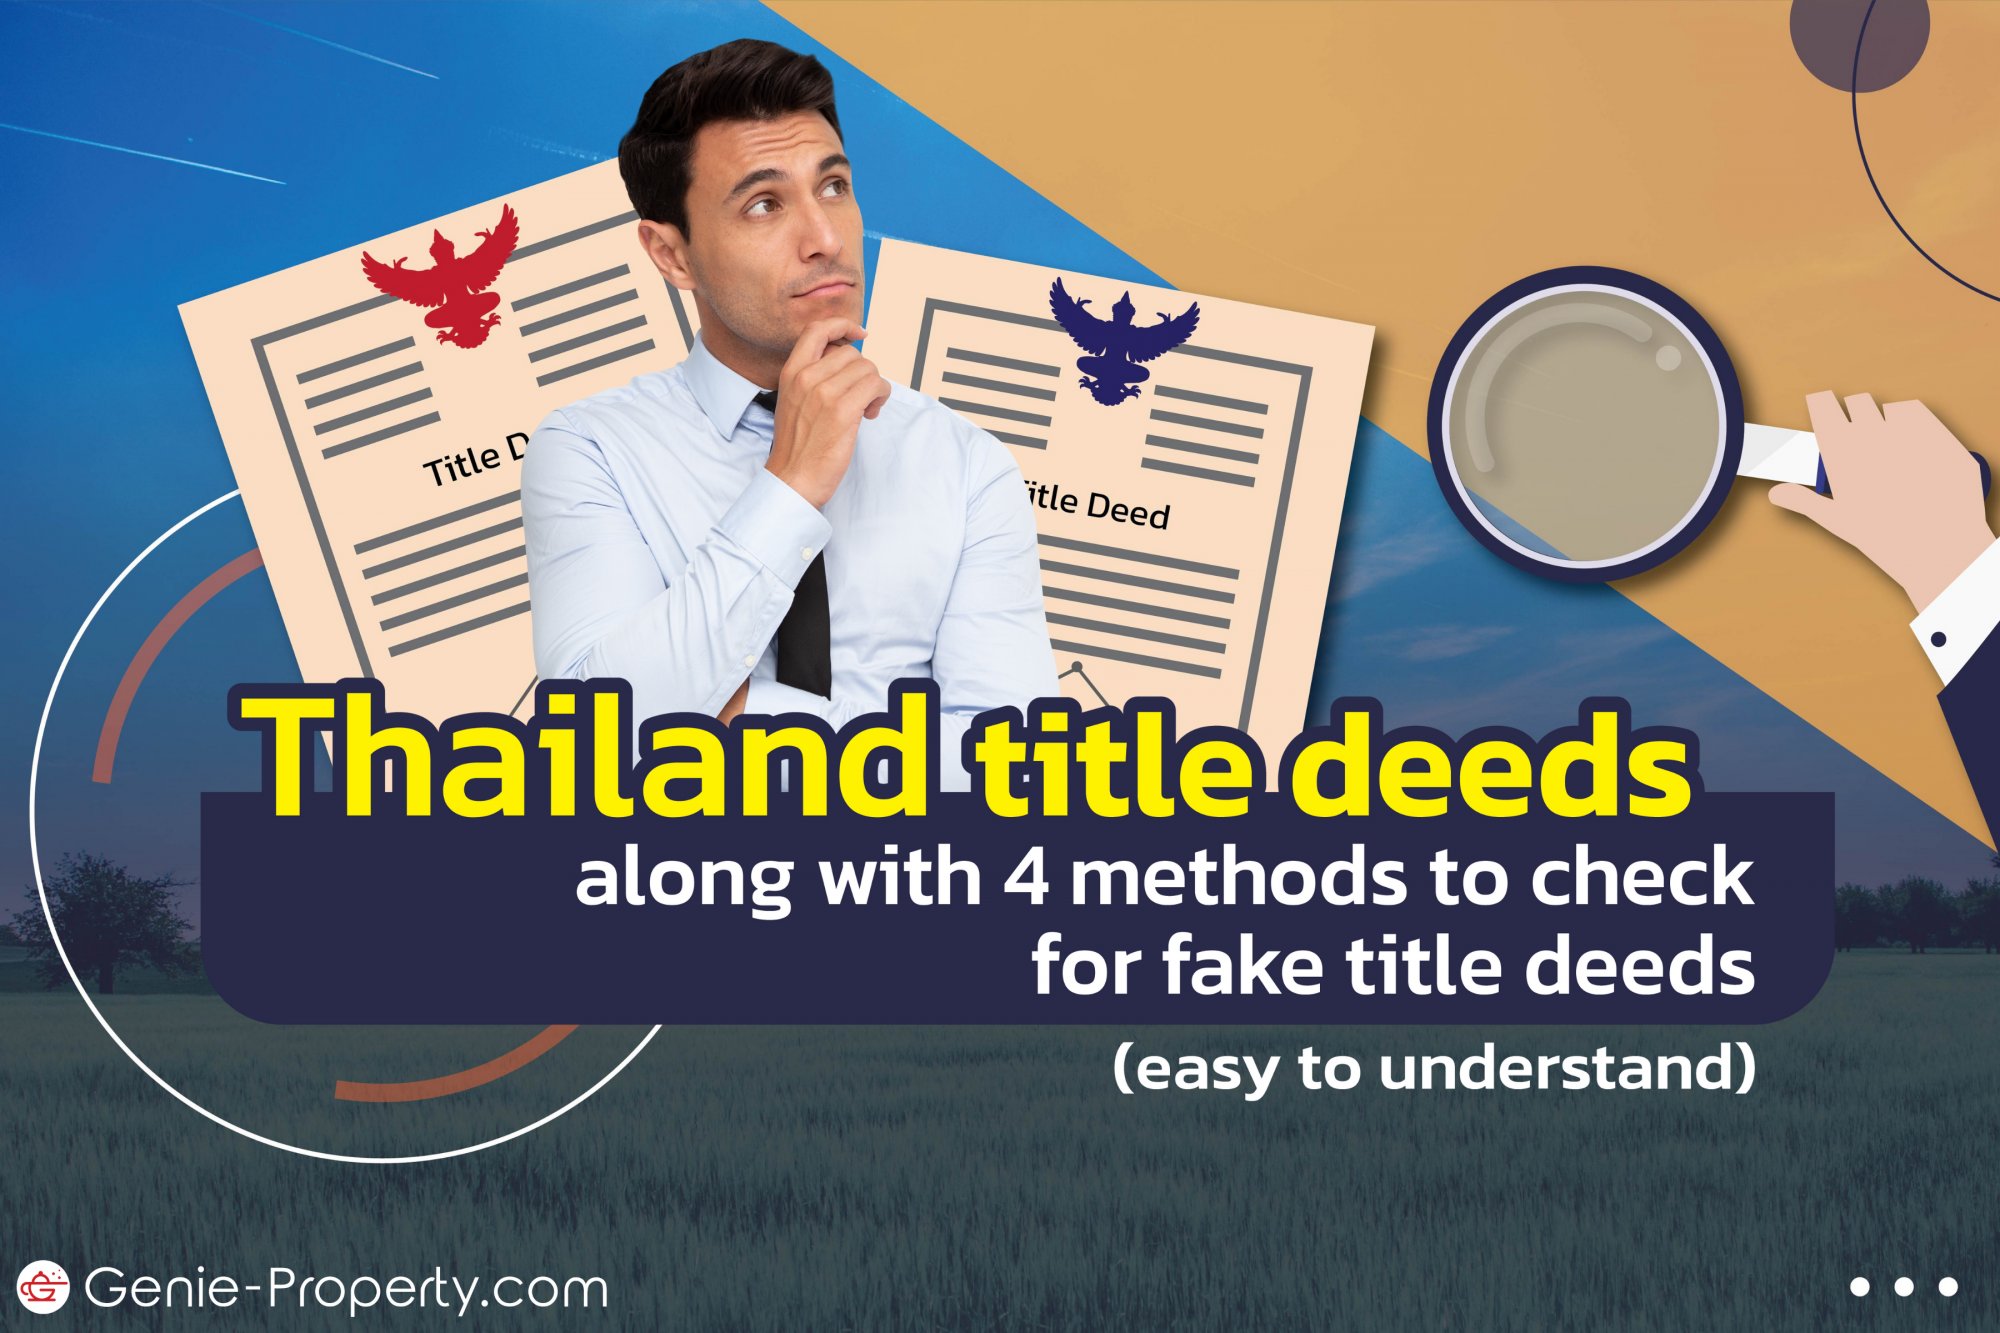 image for Thailand Land title deeds along with 4 methods to check for fake title deeds (easy to understand)